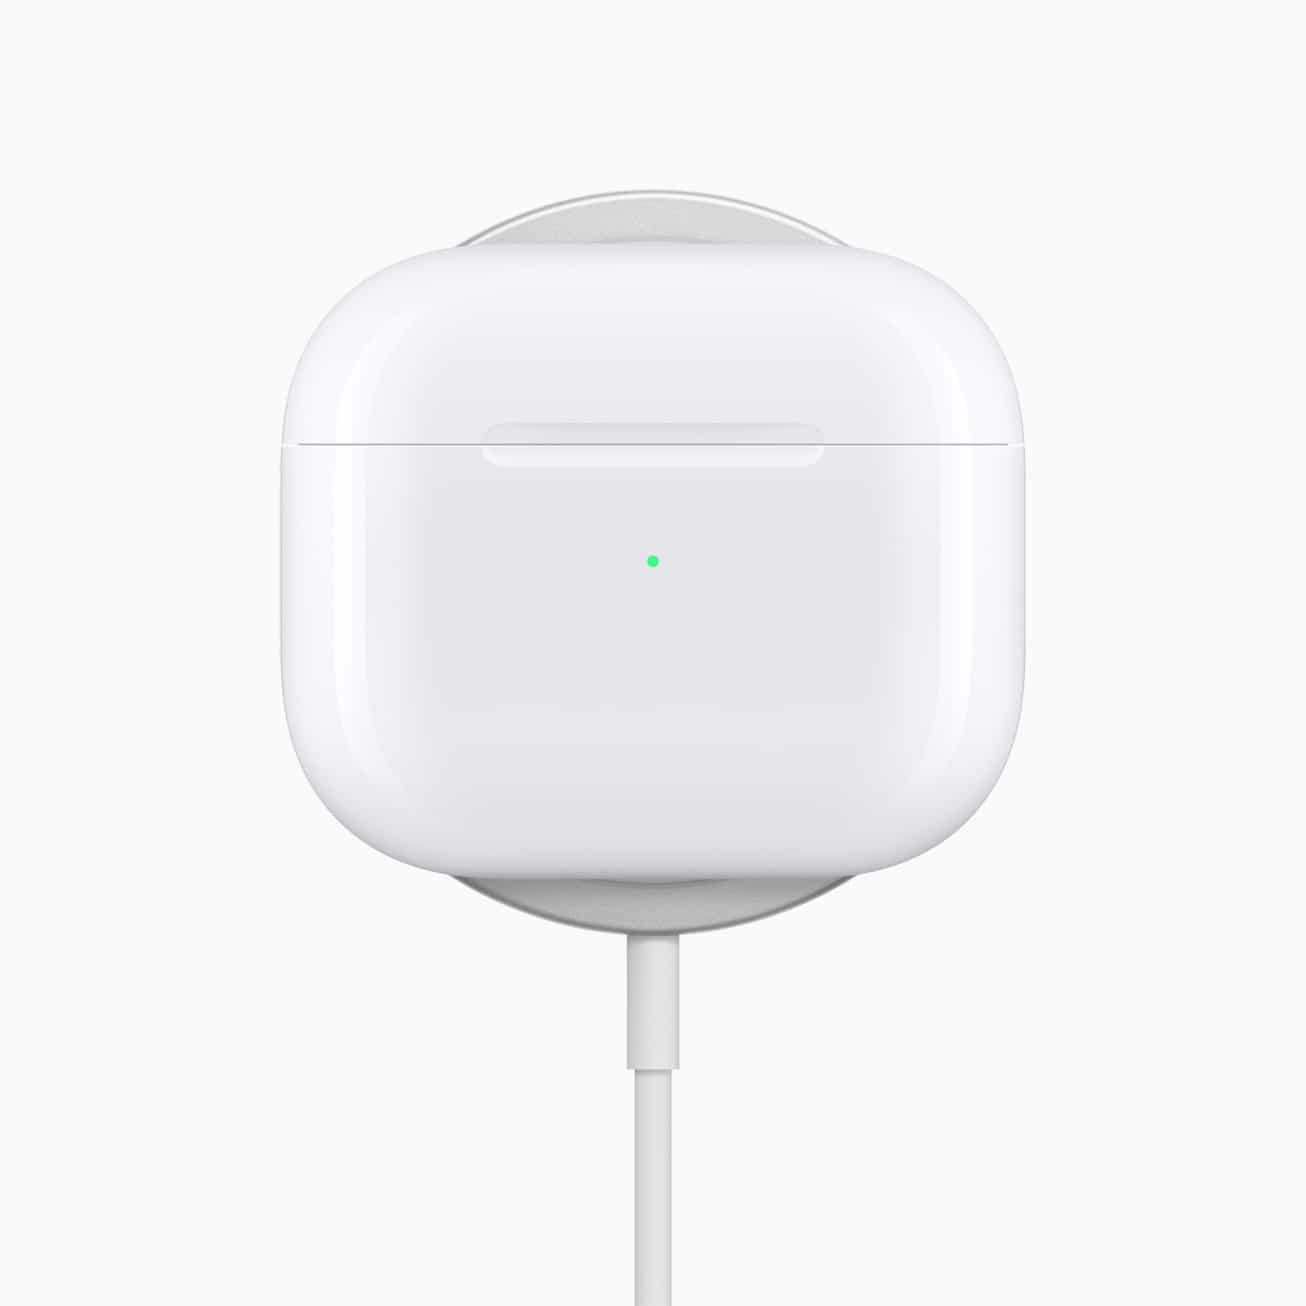 airpods magsafe charging